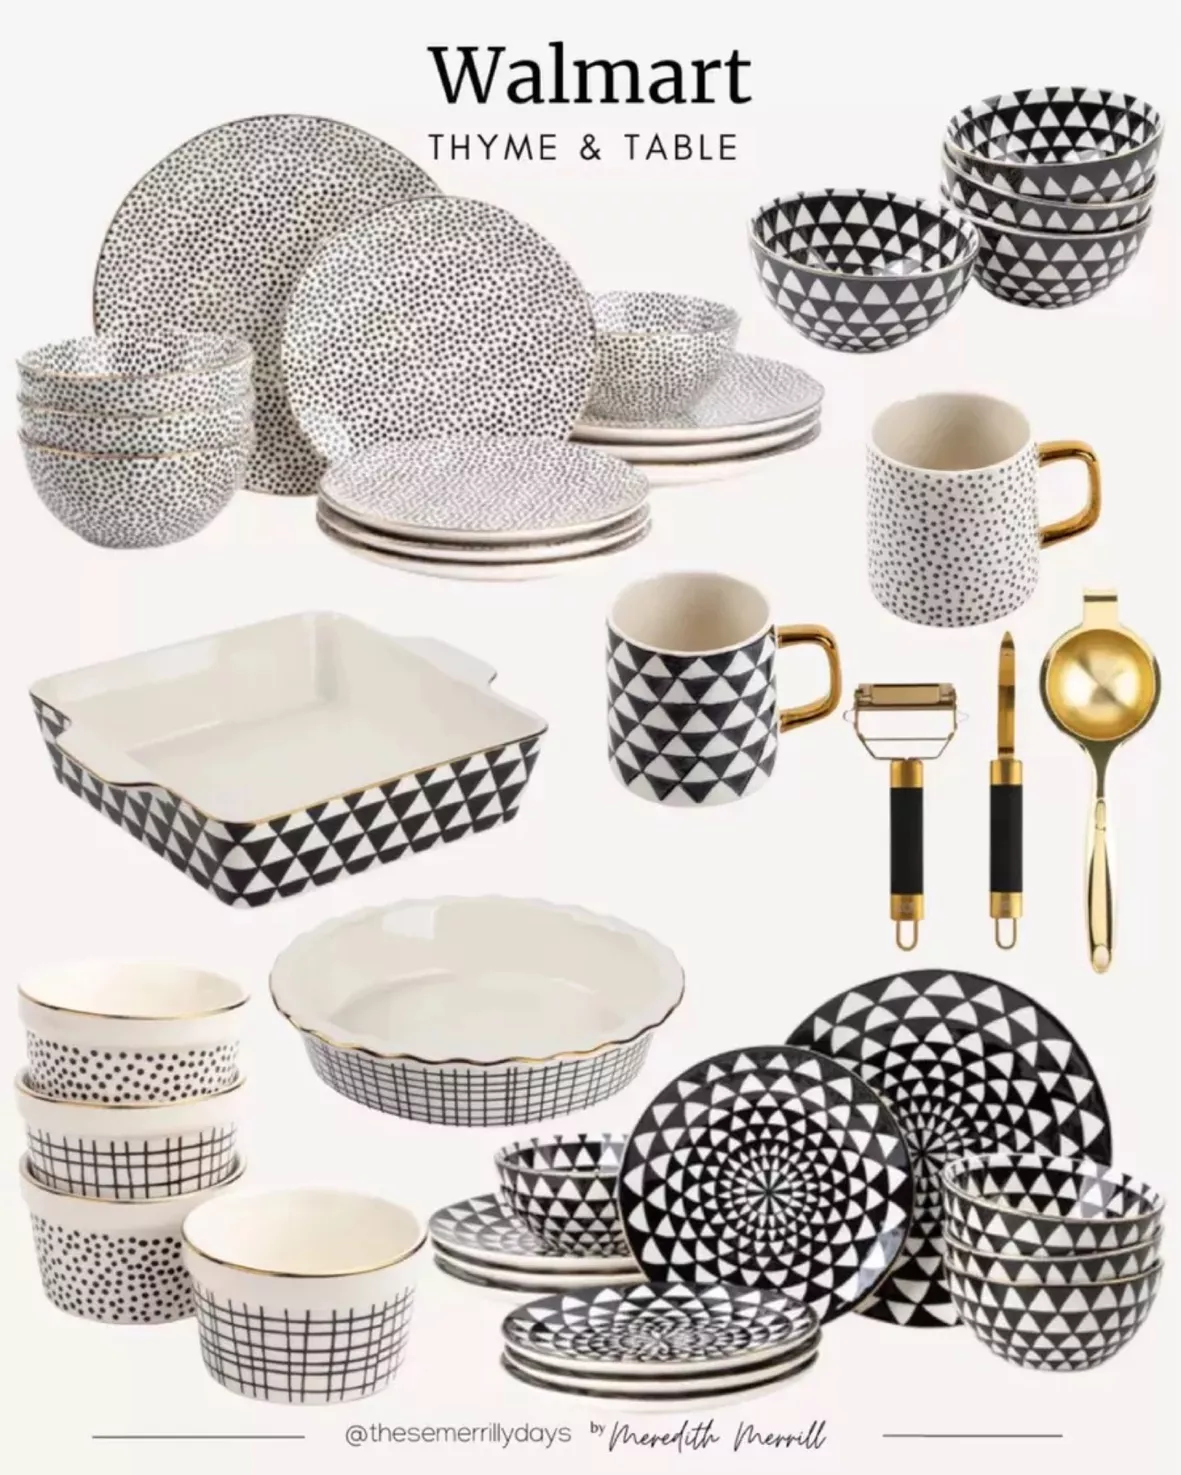 Thyme & Table Dinnerware Black & White Dot Stoneware, 12 Piece Set, Dinnerware  Set, Dishes and Plates Sets